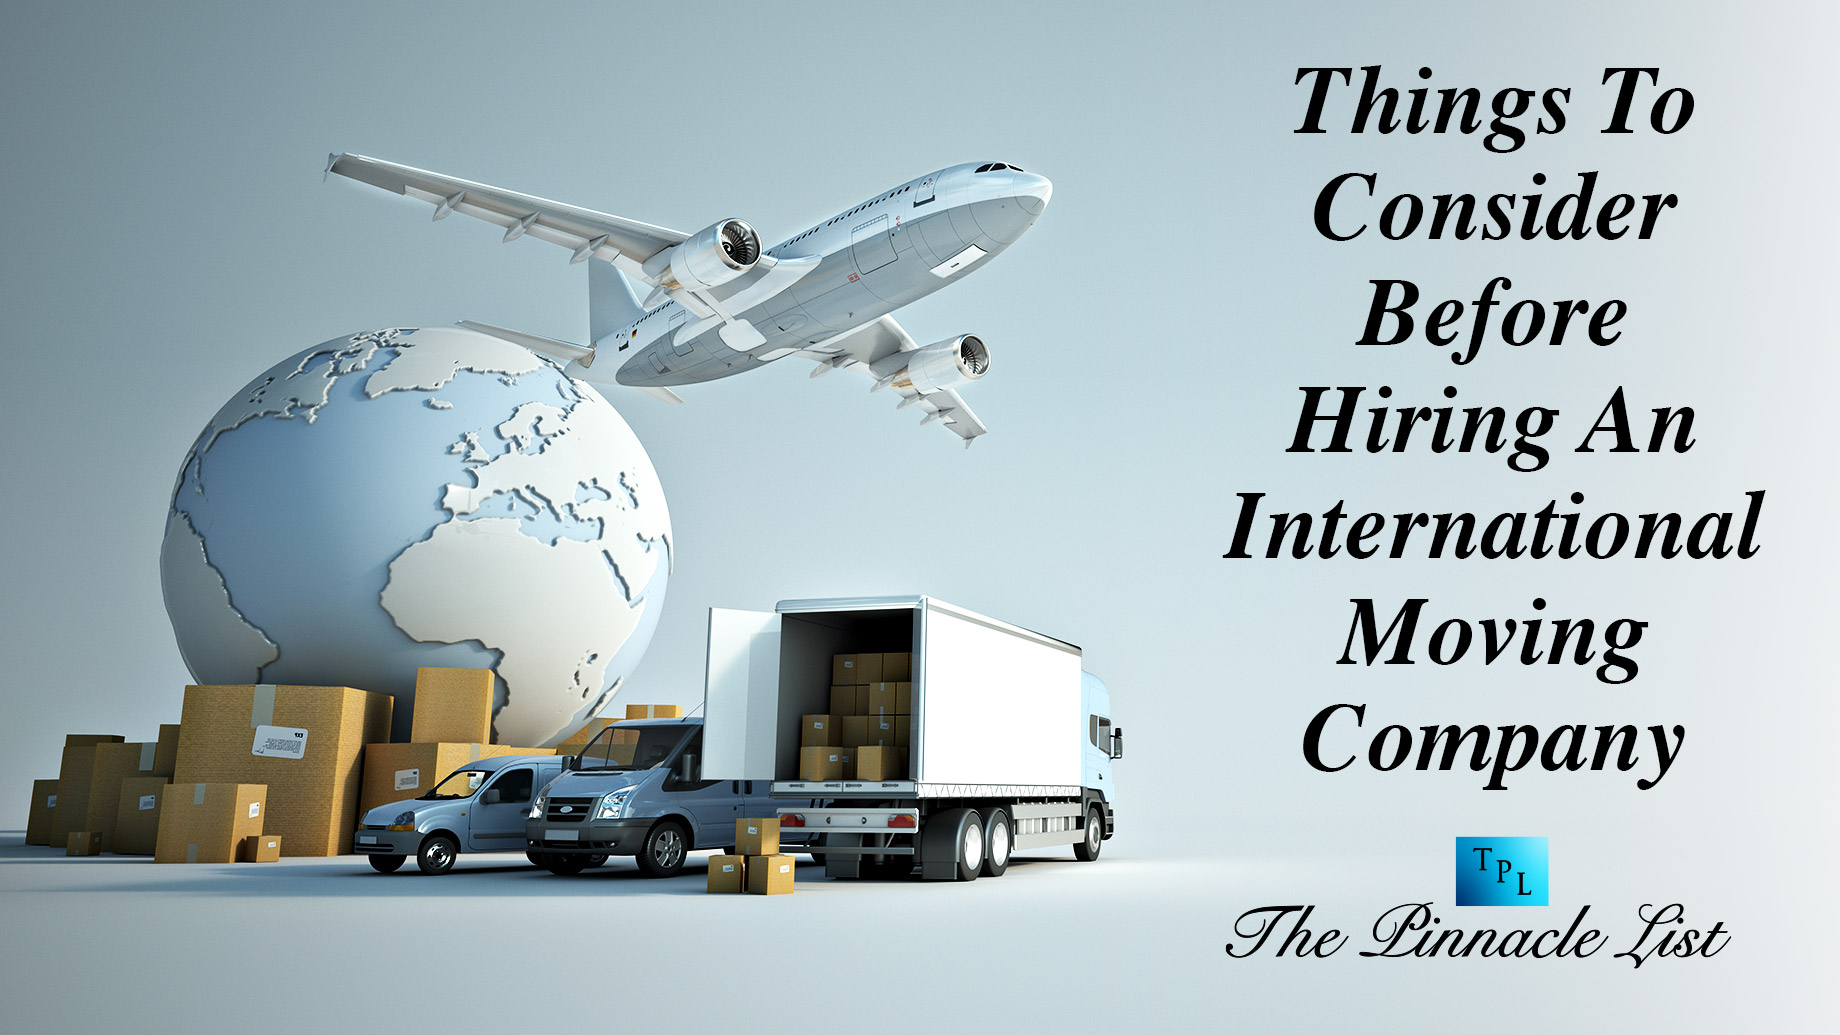 Things To Consider Before Hiring An International Moving Company